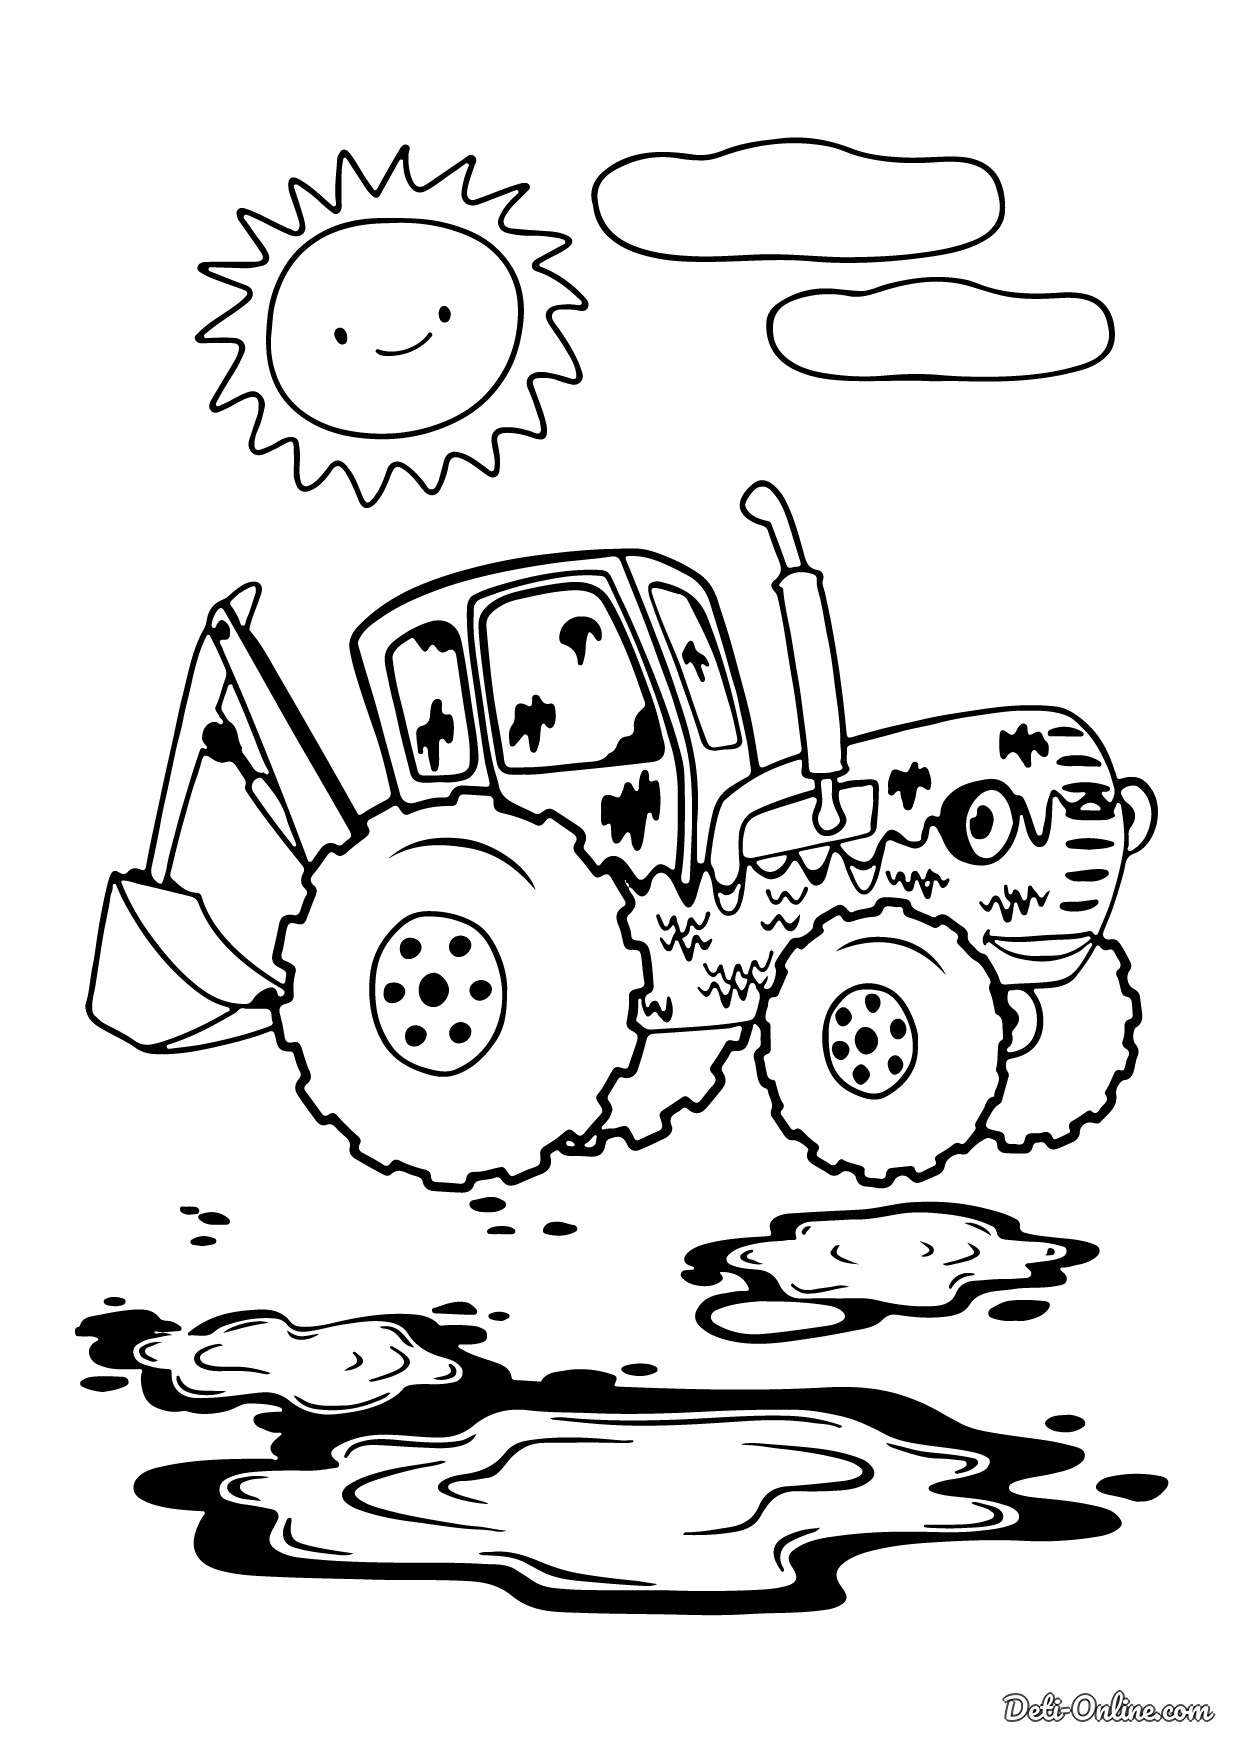 Discover the Animal Friends in the Blue Tractor Cartoon